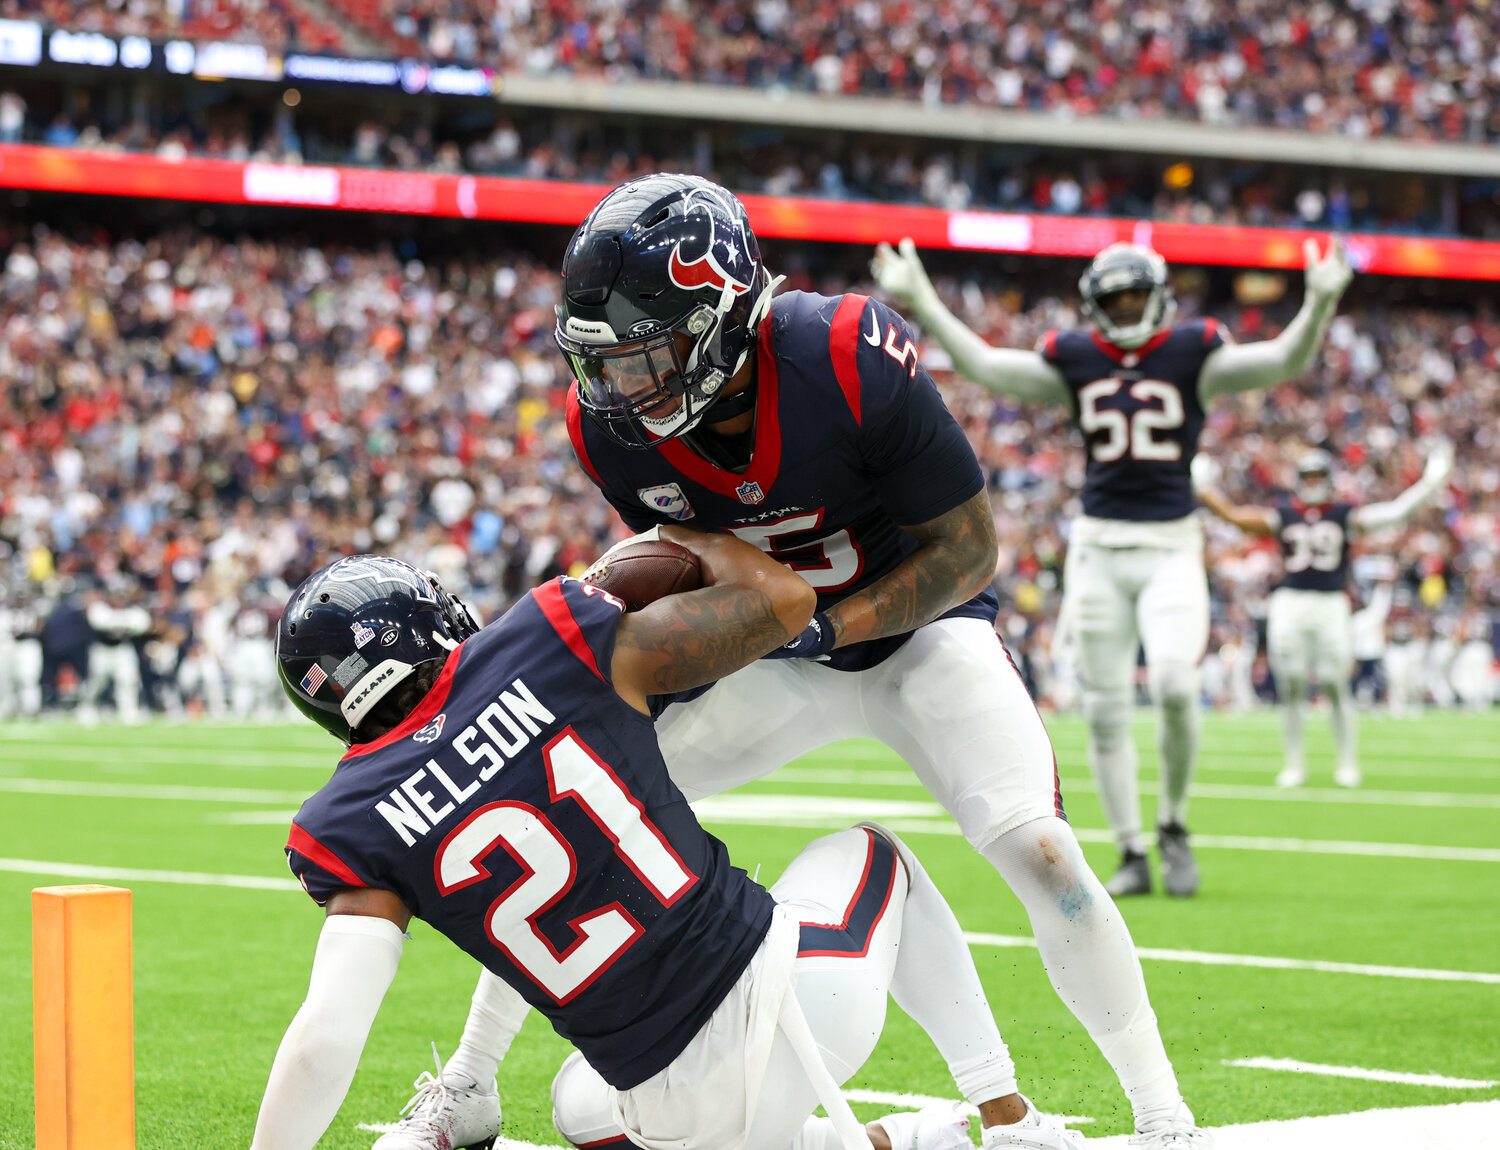 Texans cornerback Steven Nelson (21) celebrates with safety Jalen Pitre (5) after Nelson made an interception to end the Saints’ final opportunity to tie the game in an NFL game between the Texans and the Saints on October 15, 2023 in Houston. The Texans won, 20-13.